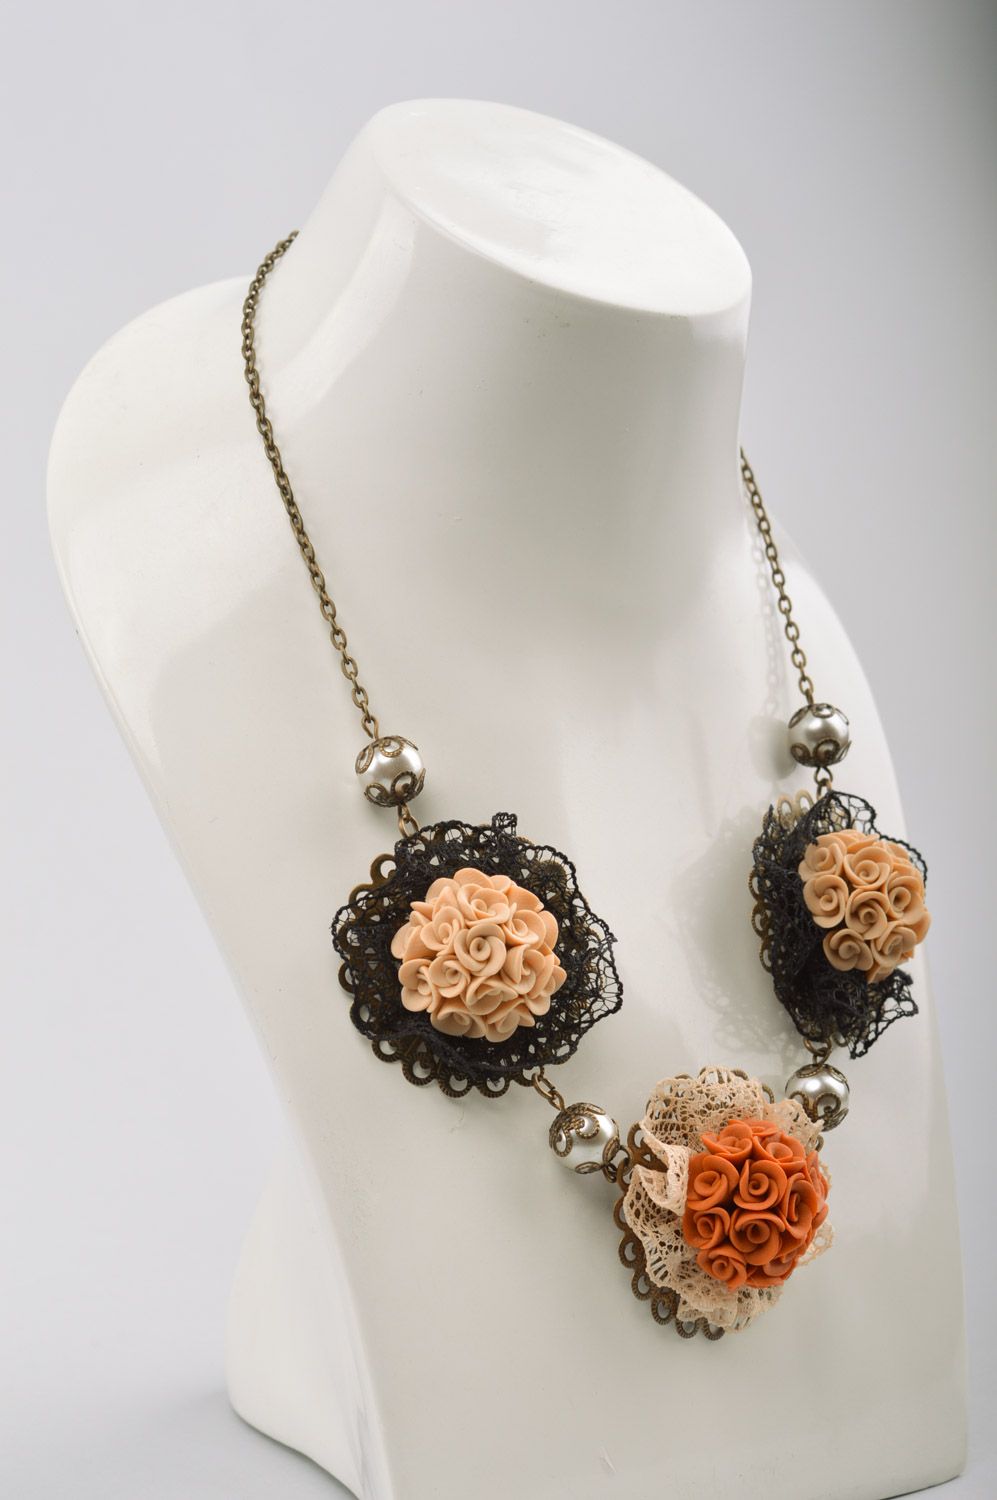 Handmade volume polymer clay flower necklace with lace and beads in antique style photo 4